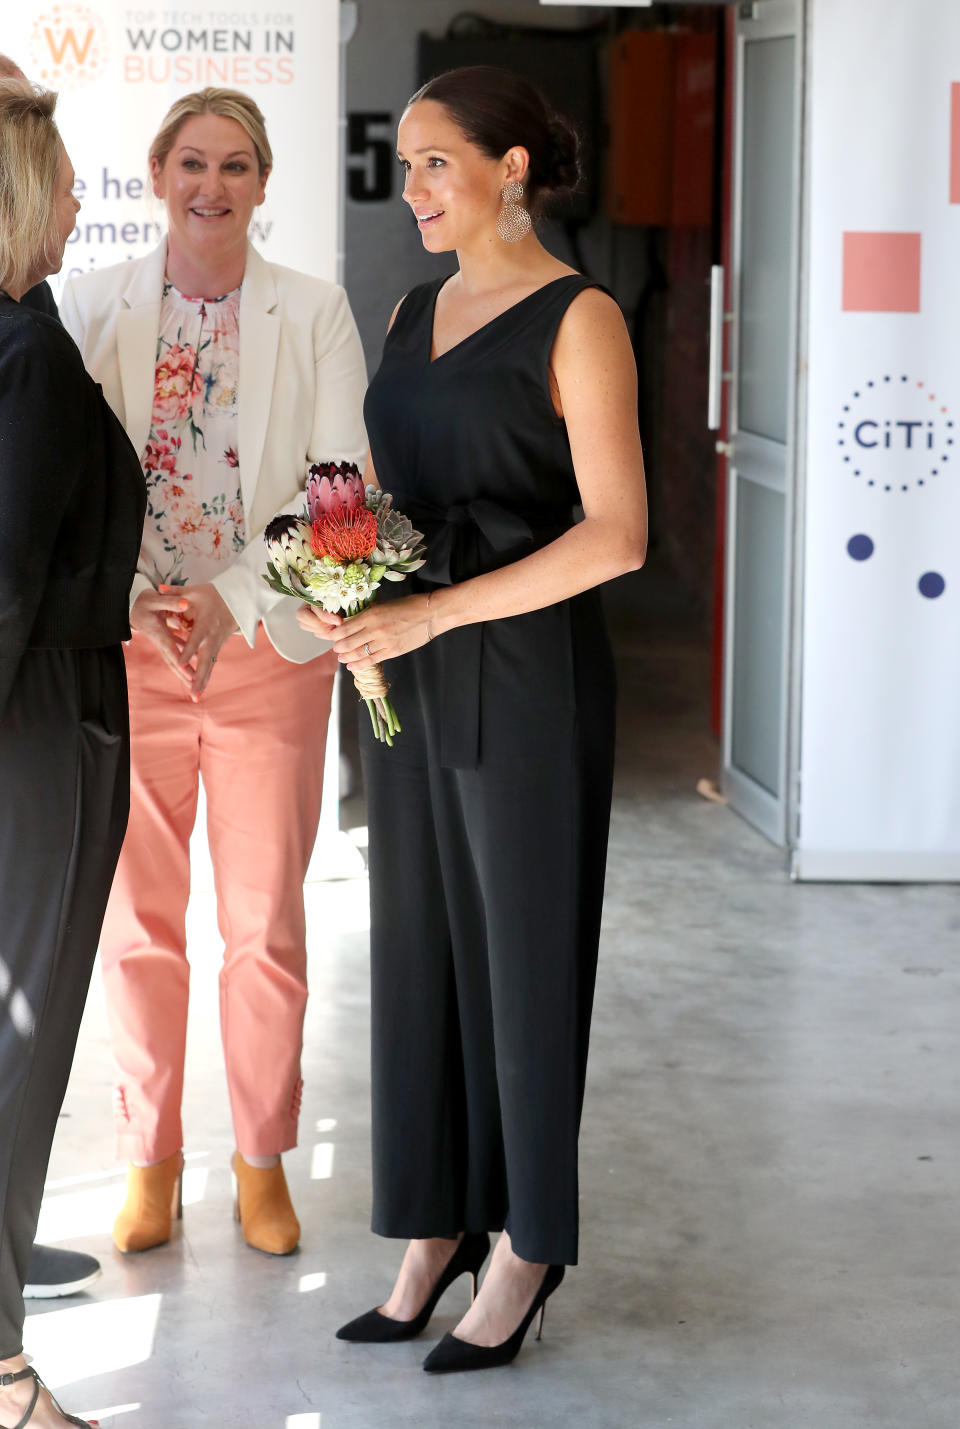 The Duchess of Sussex wearing her Everlane jumpsuit during the royal tour of South Africa on September 25, 2019. [Photo: Getty]